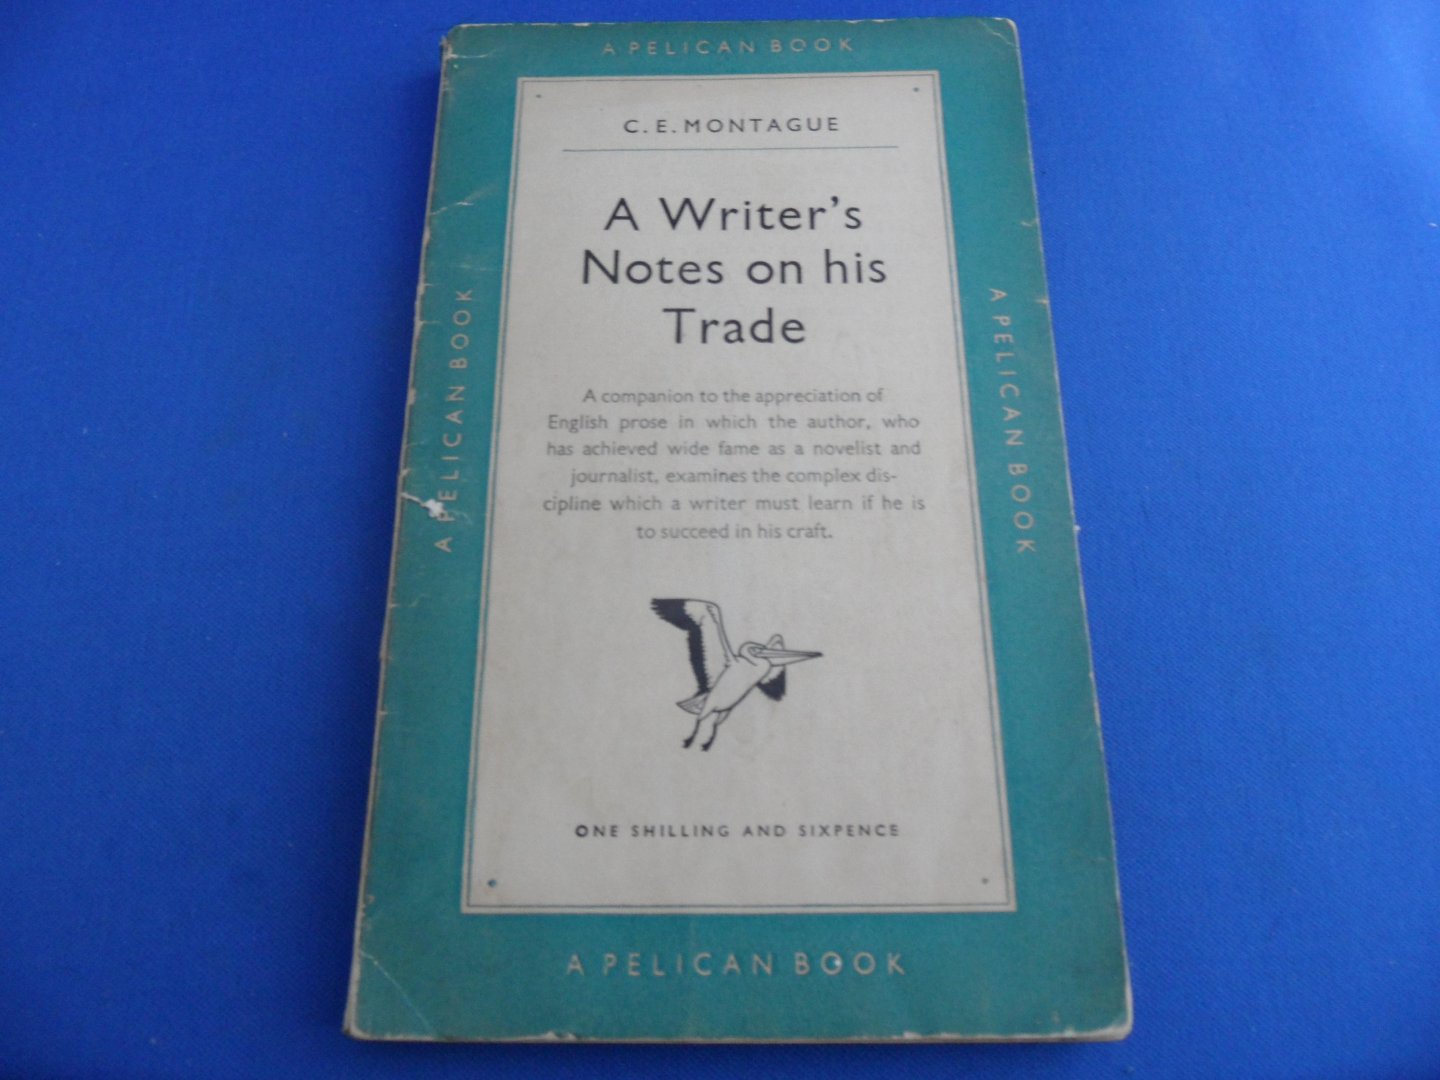 Montague, C.E. - Writer's Notes on his Trade